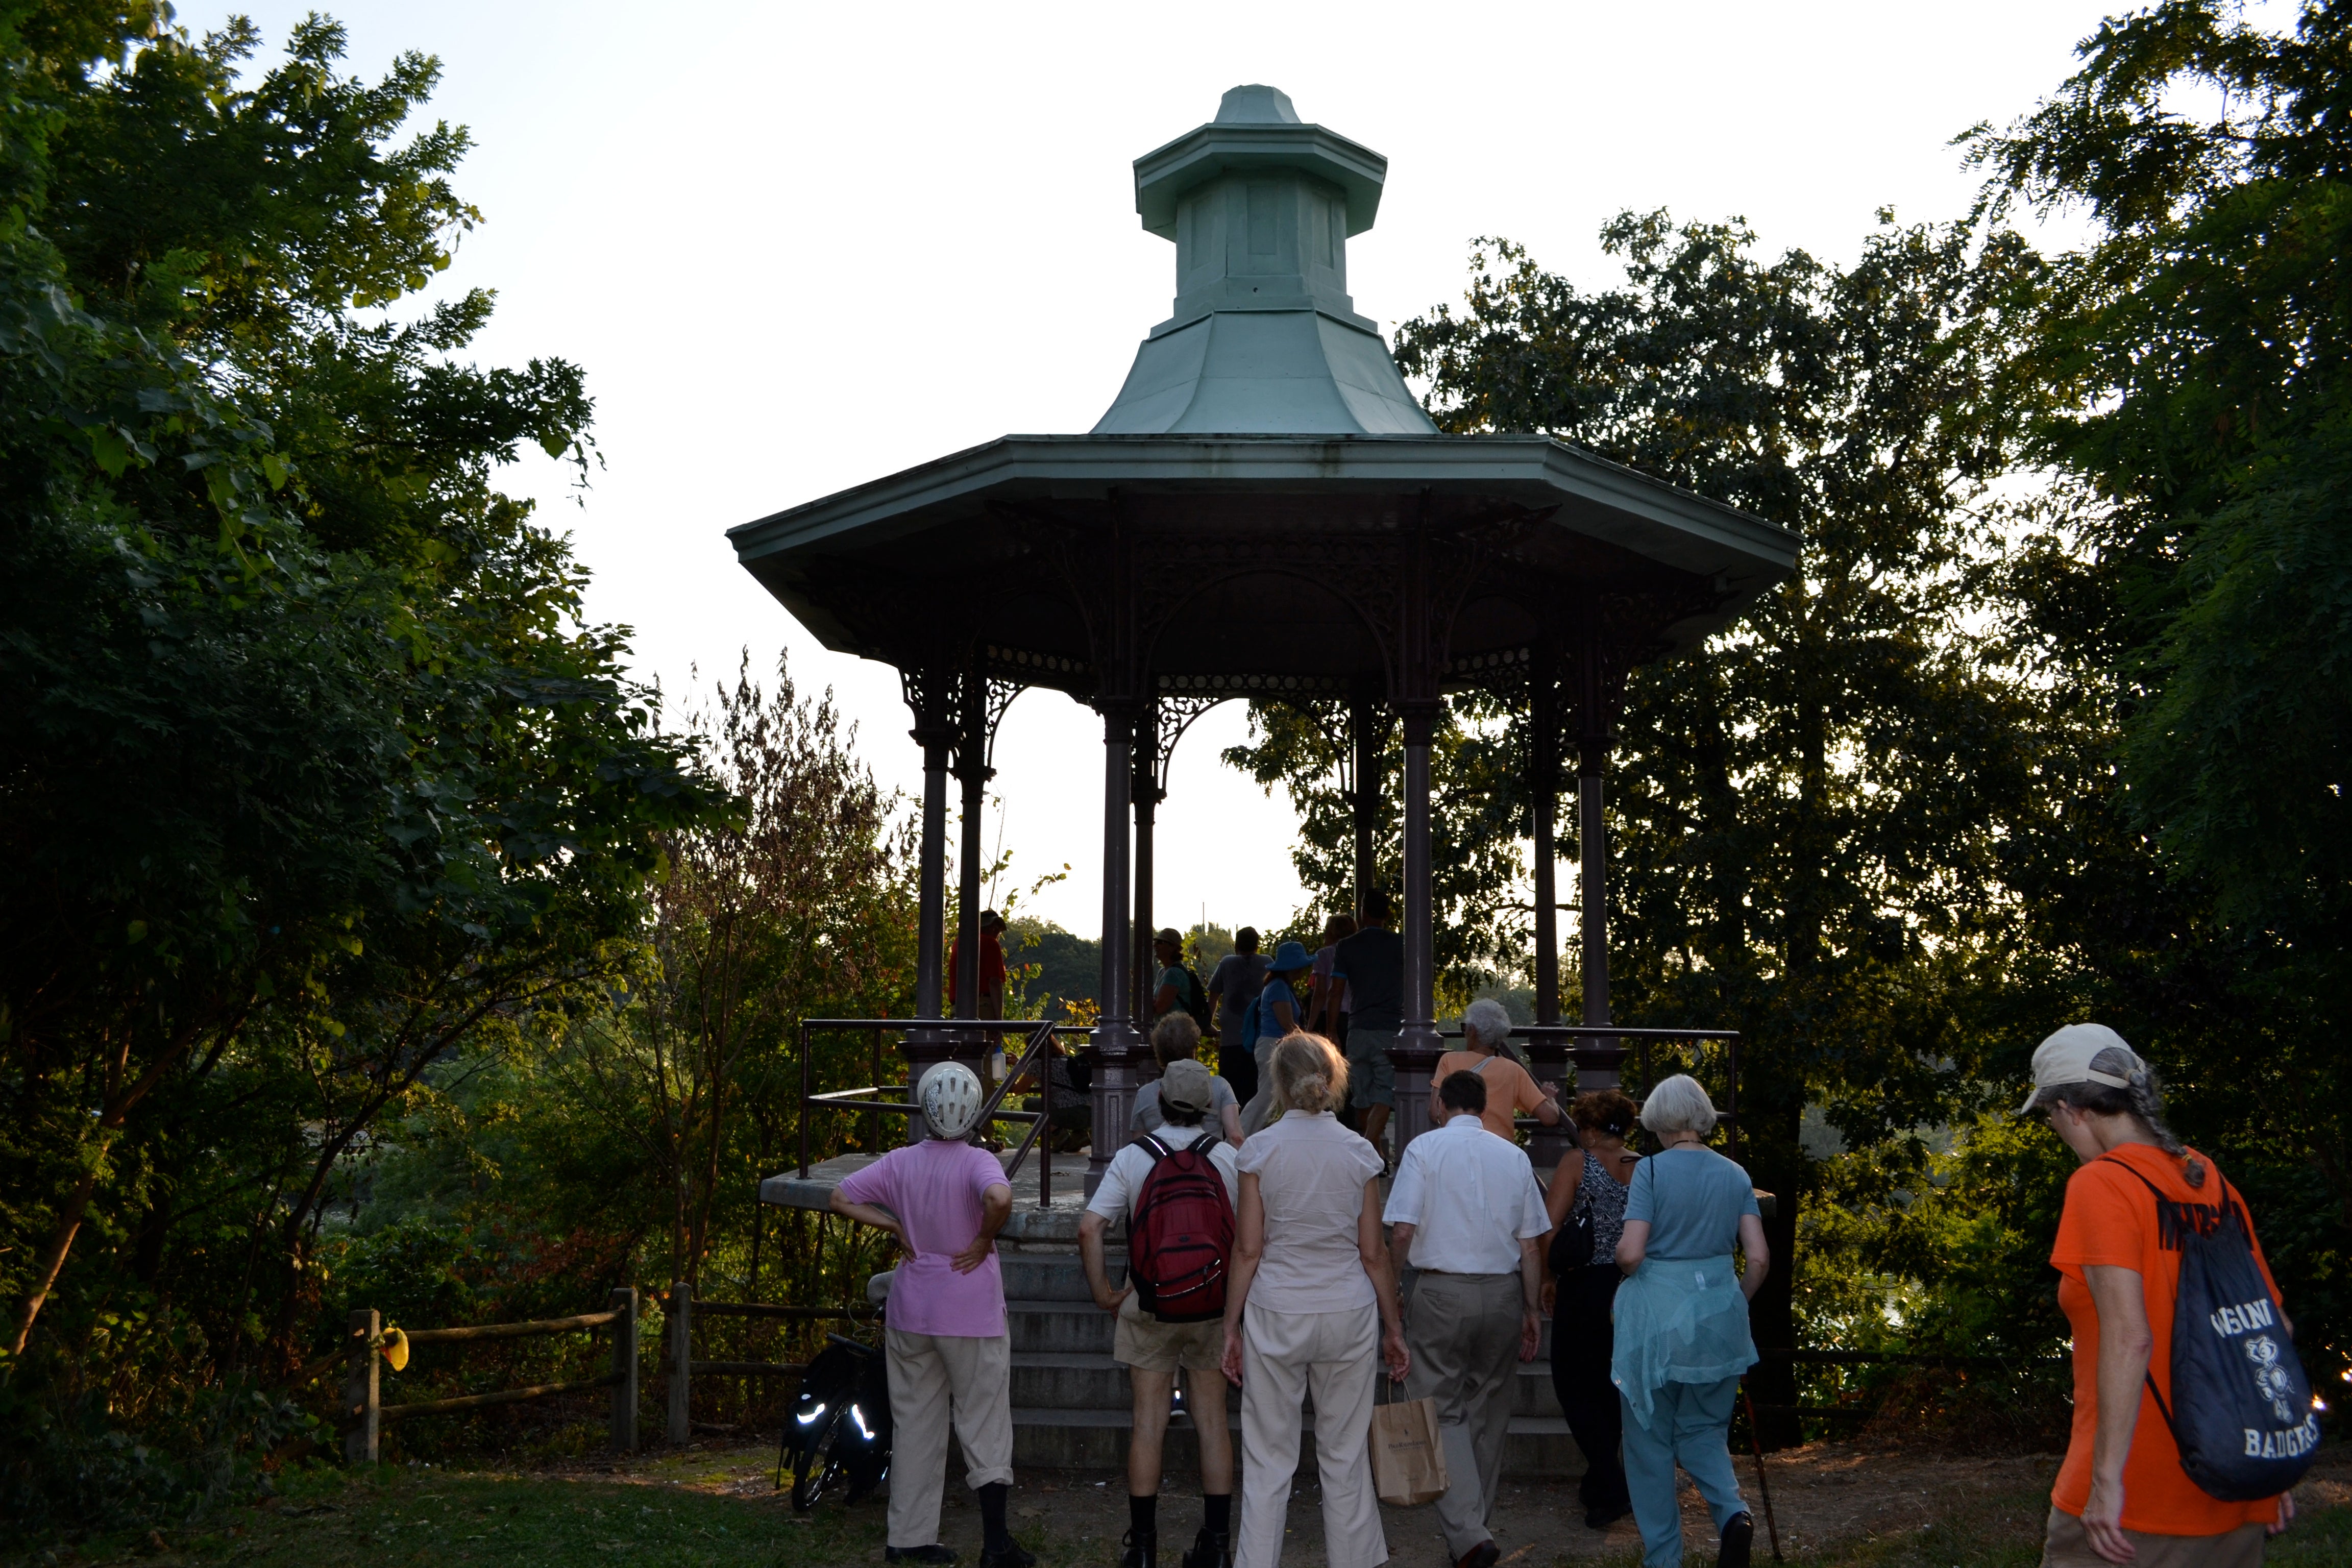 The third gazebo is nestled on the hill overlooking Kelly Drive and the upstream end of Boathouse Row